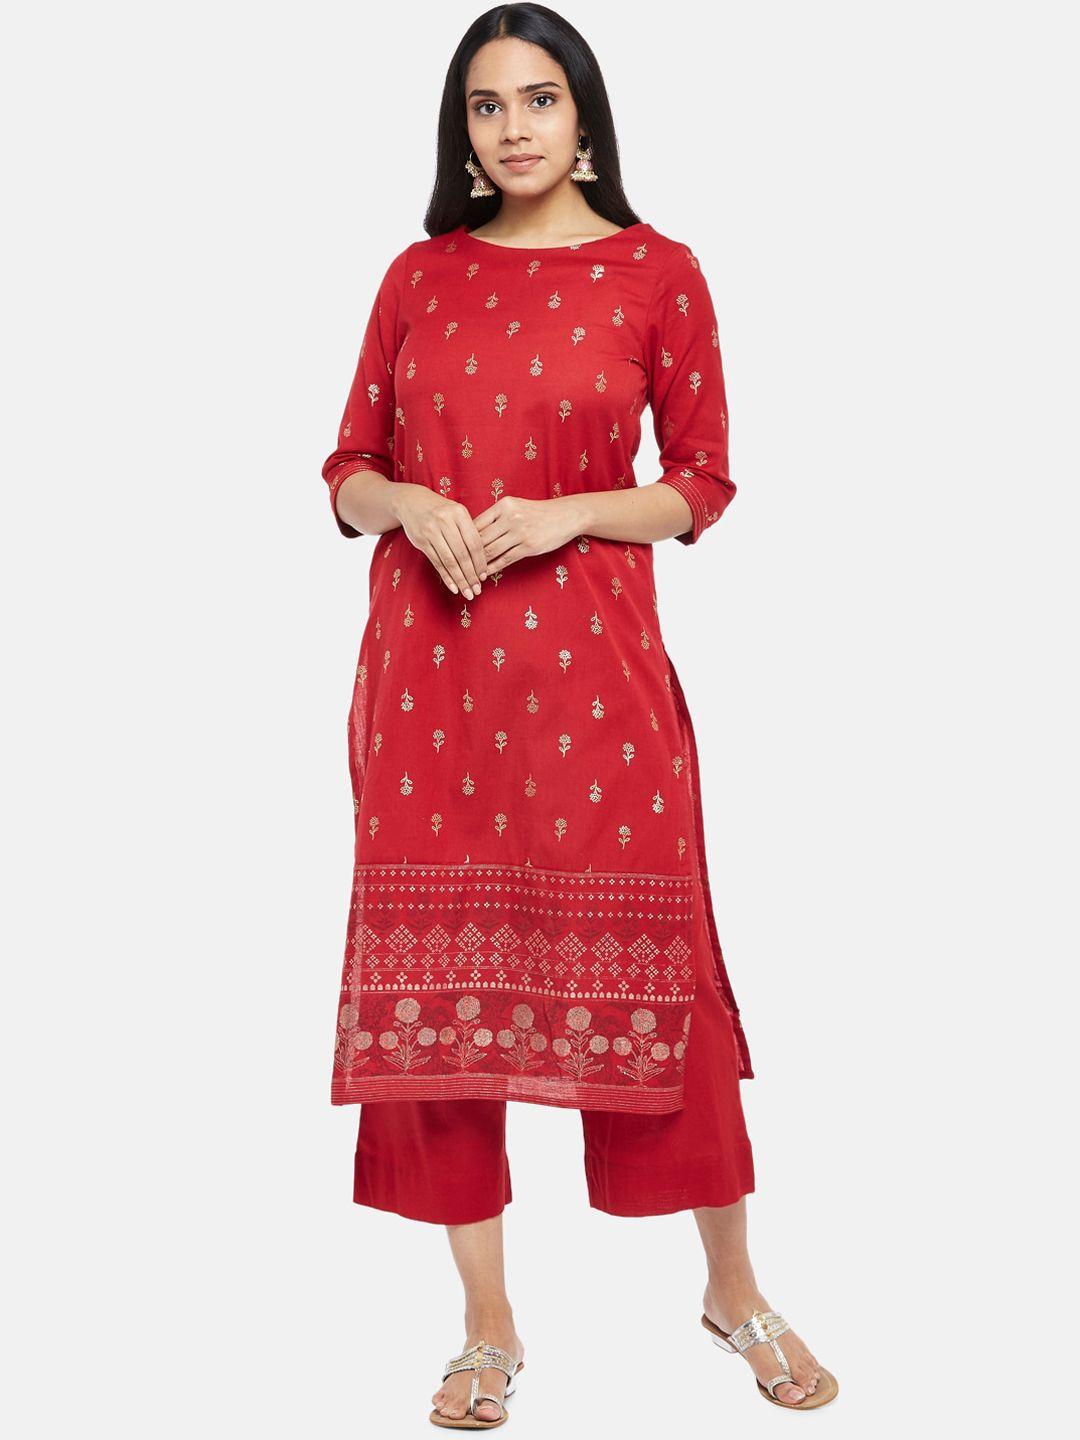 rangmanch by pantaloons women red floral printed pure cotton kurta with palazzos